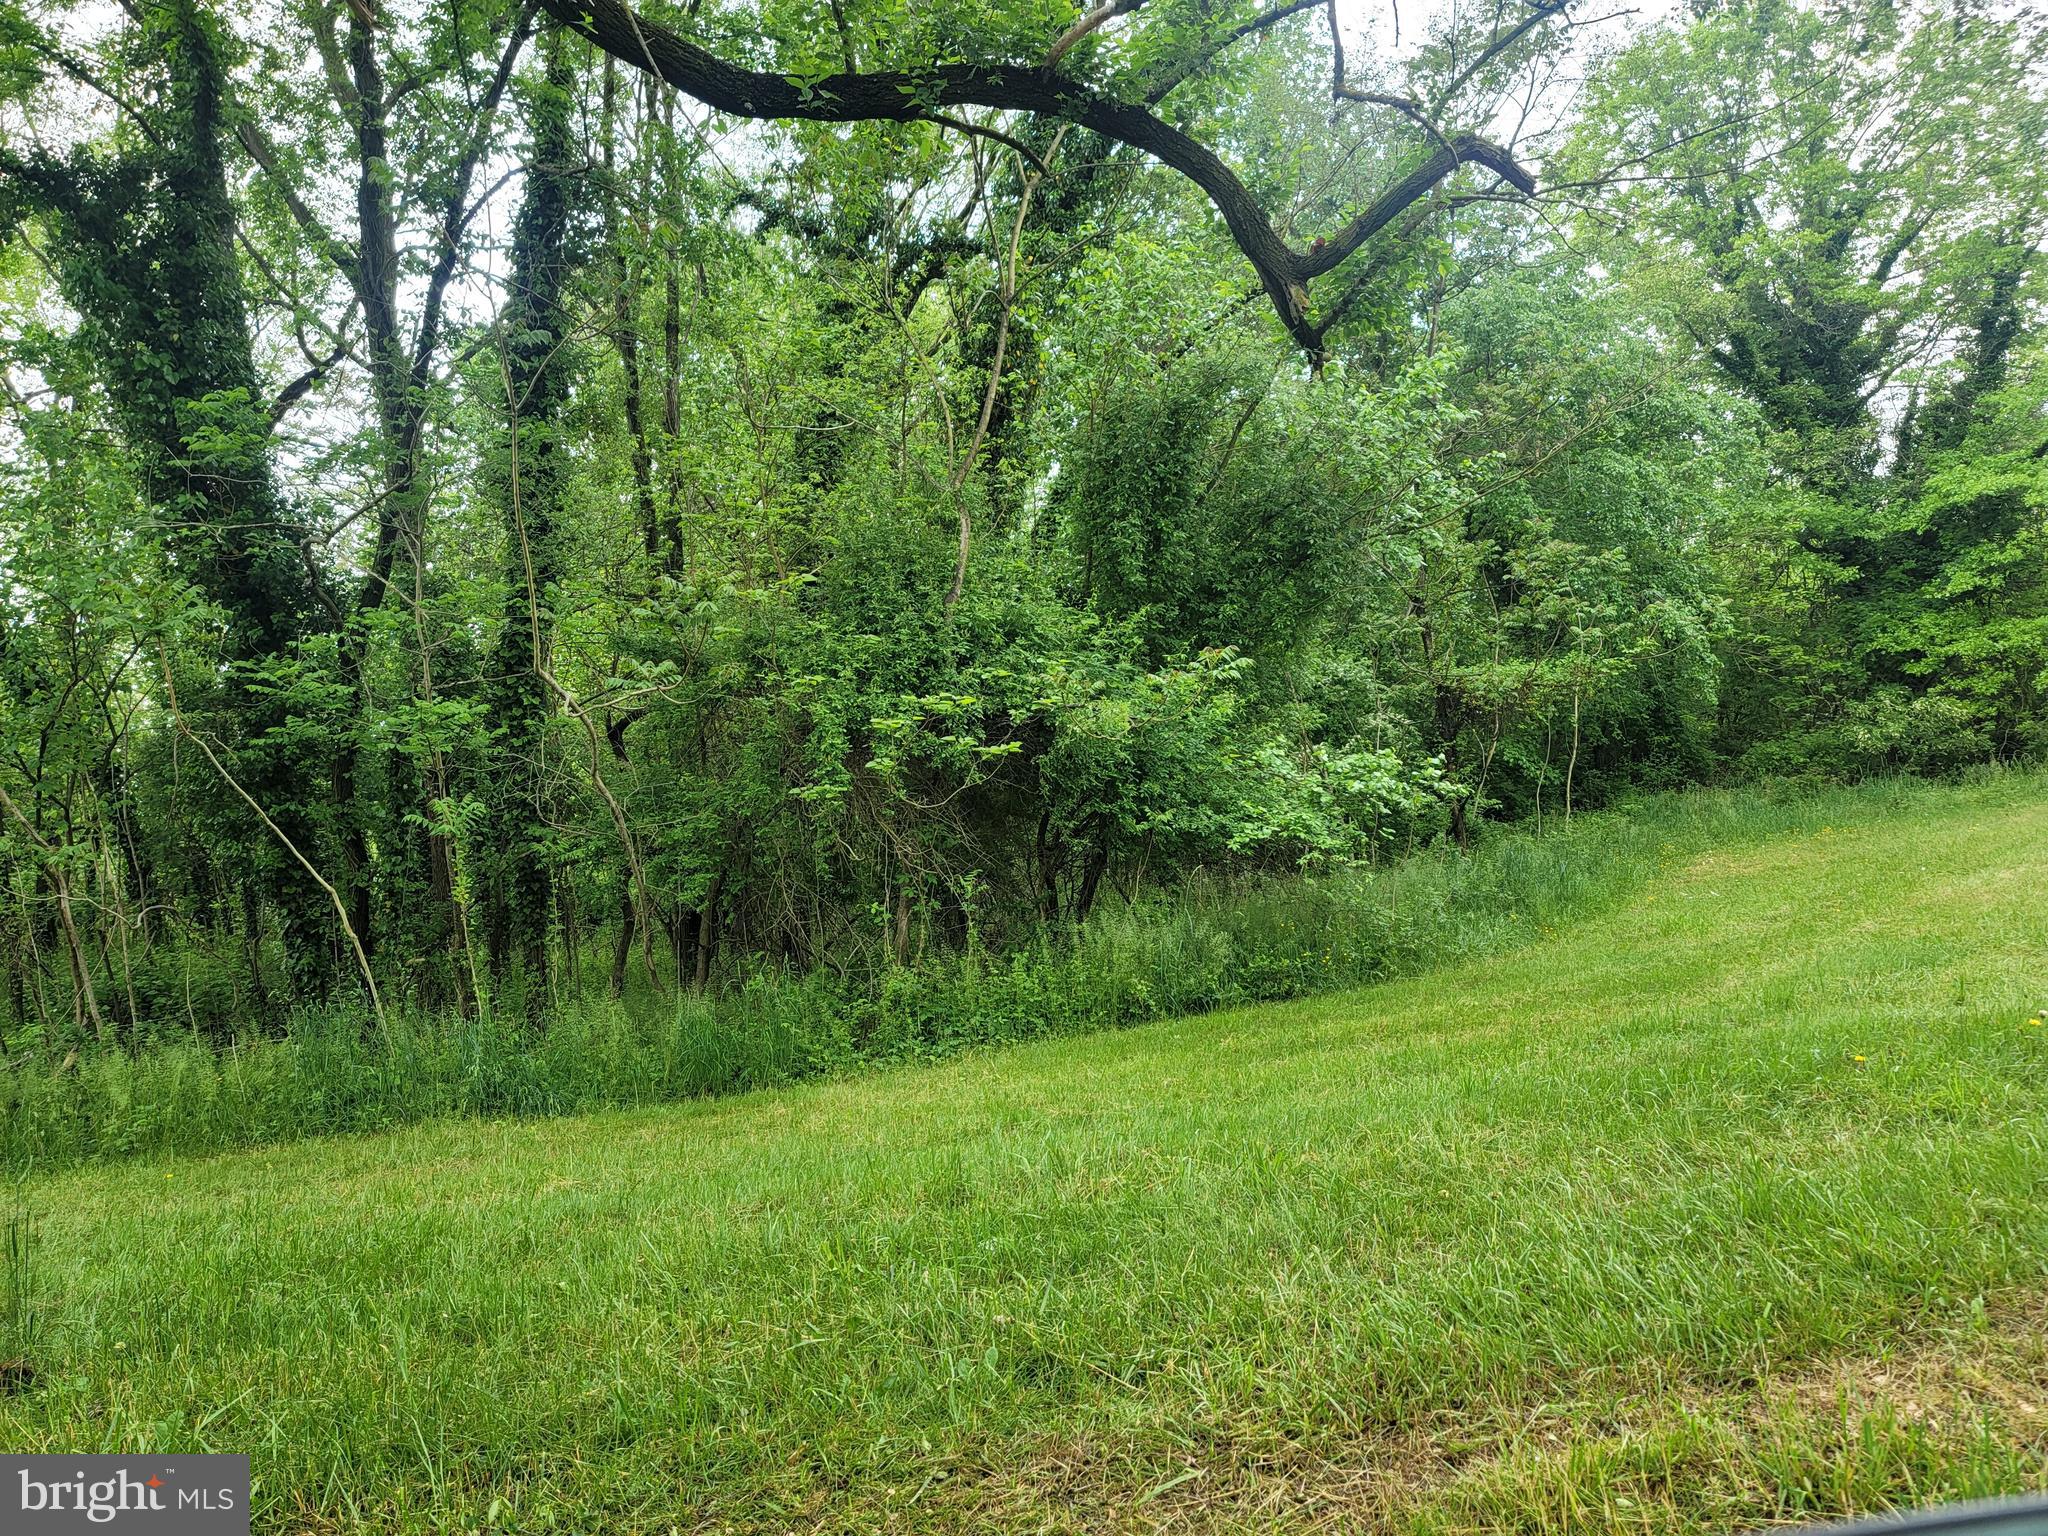 a view of a lush green space